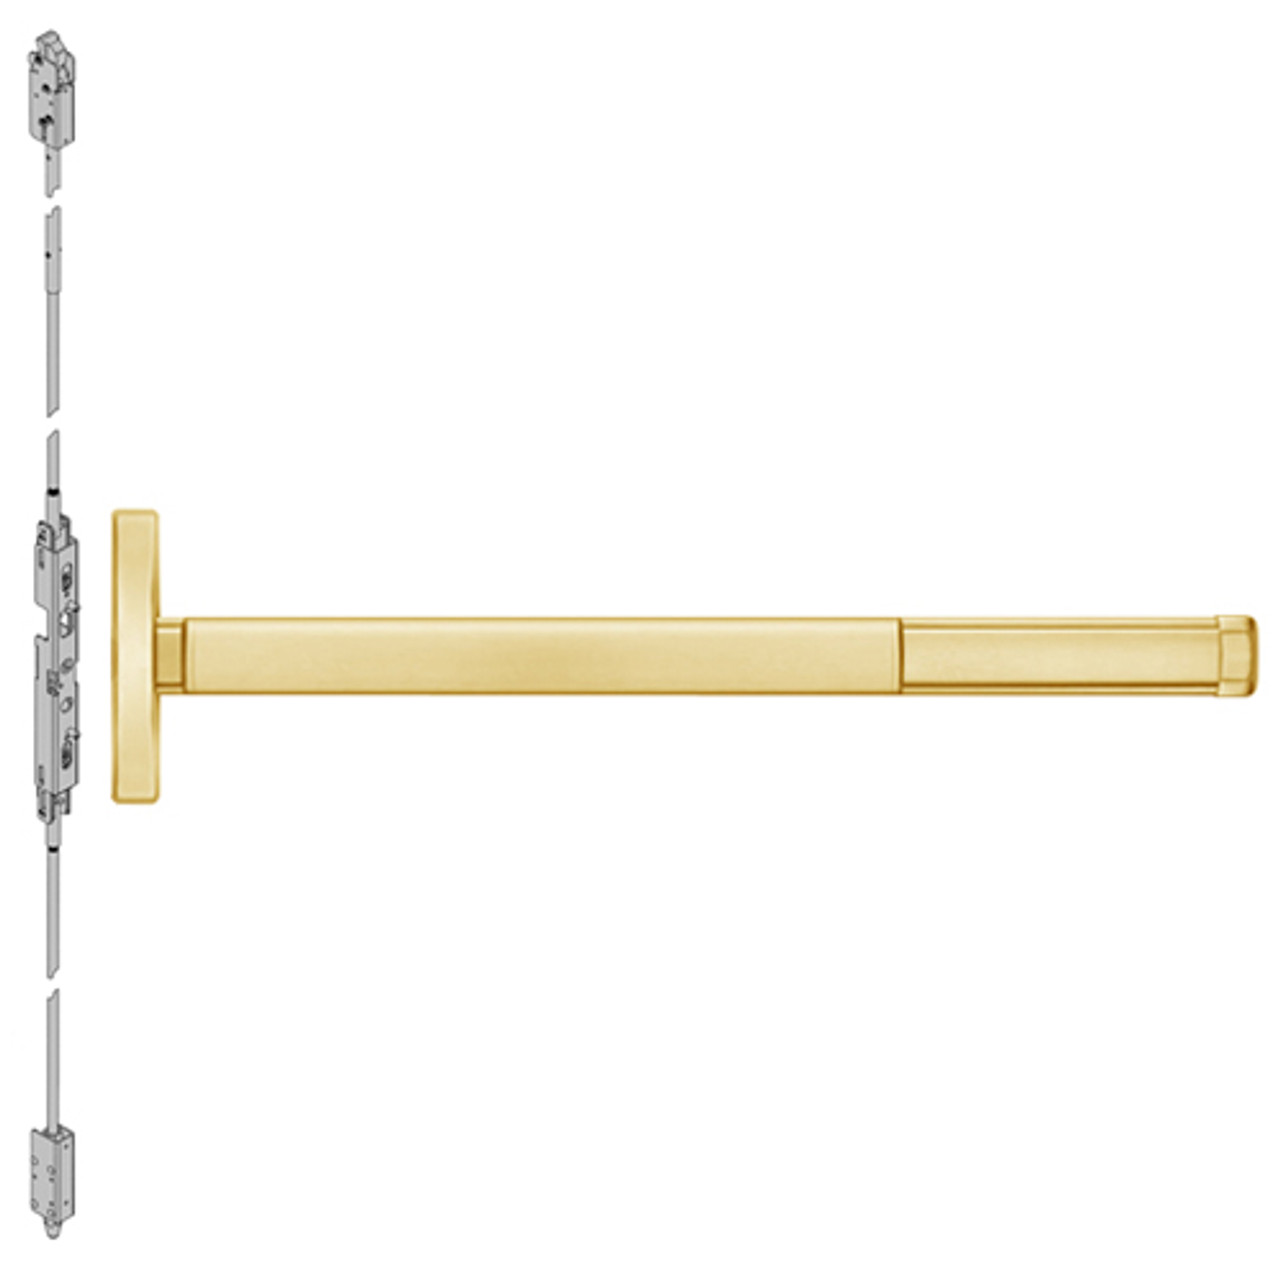 FL2603LBR-605-48 PHI 2600 Series Fire Rated Concealed Vertical Rod Exit Device Prepped for Key Retracts Latchbolt with Less Bottom Rod in Bright Brass Finish